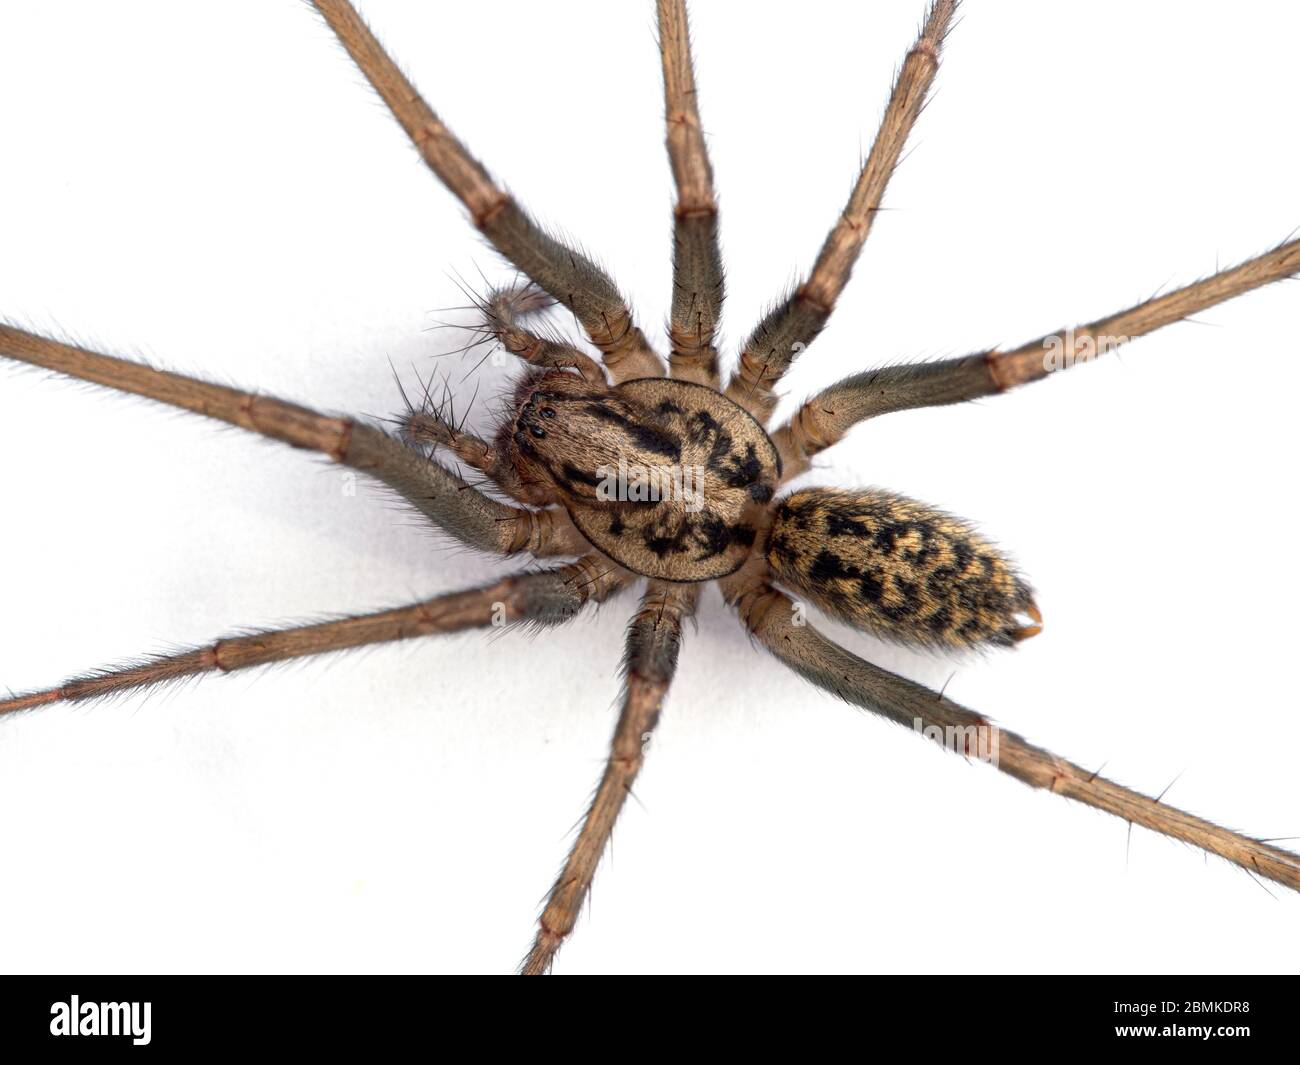 Close-up of the body of a female giant house spider, or hobo spider (Eratigena duellica) on a white wall. Isolated. Delta, British Columbia, Canada Stock Photo